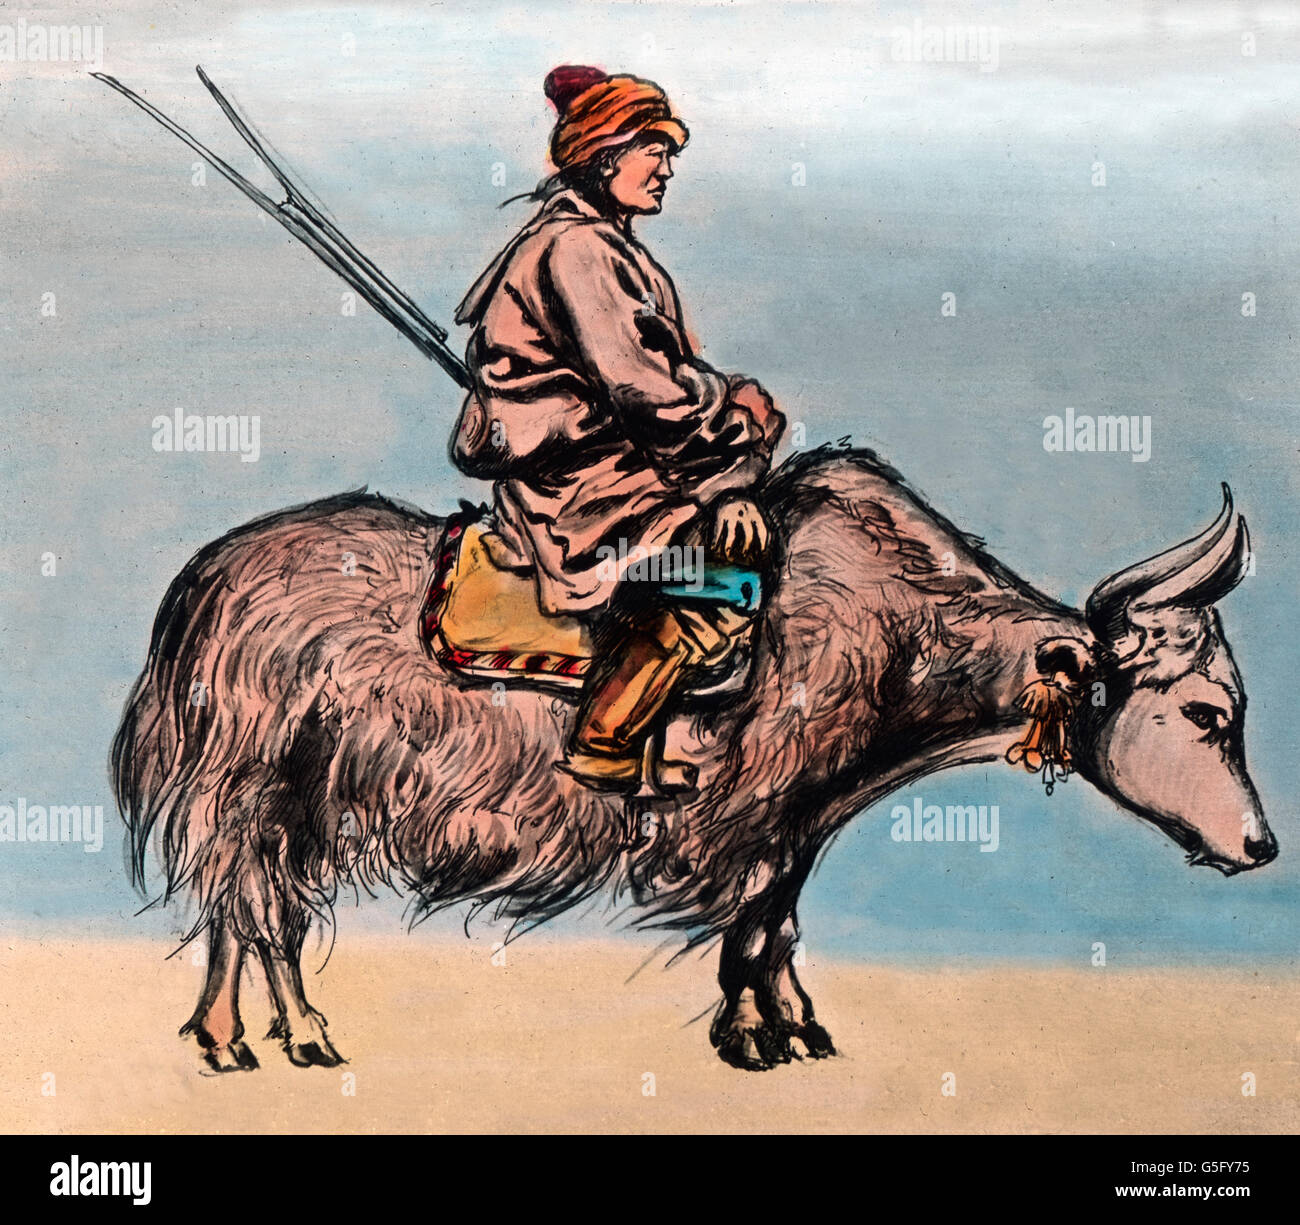 Der Vater aller Räuber. The 'father of all thiieves'. travel, history, historical, 1910s, 20th century, archive, Carl Simon, hand coloured glass slide, illustration, man, robber, thief, gangster, yak, cattle, rider, riding, array Stock Photo